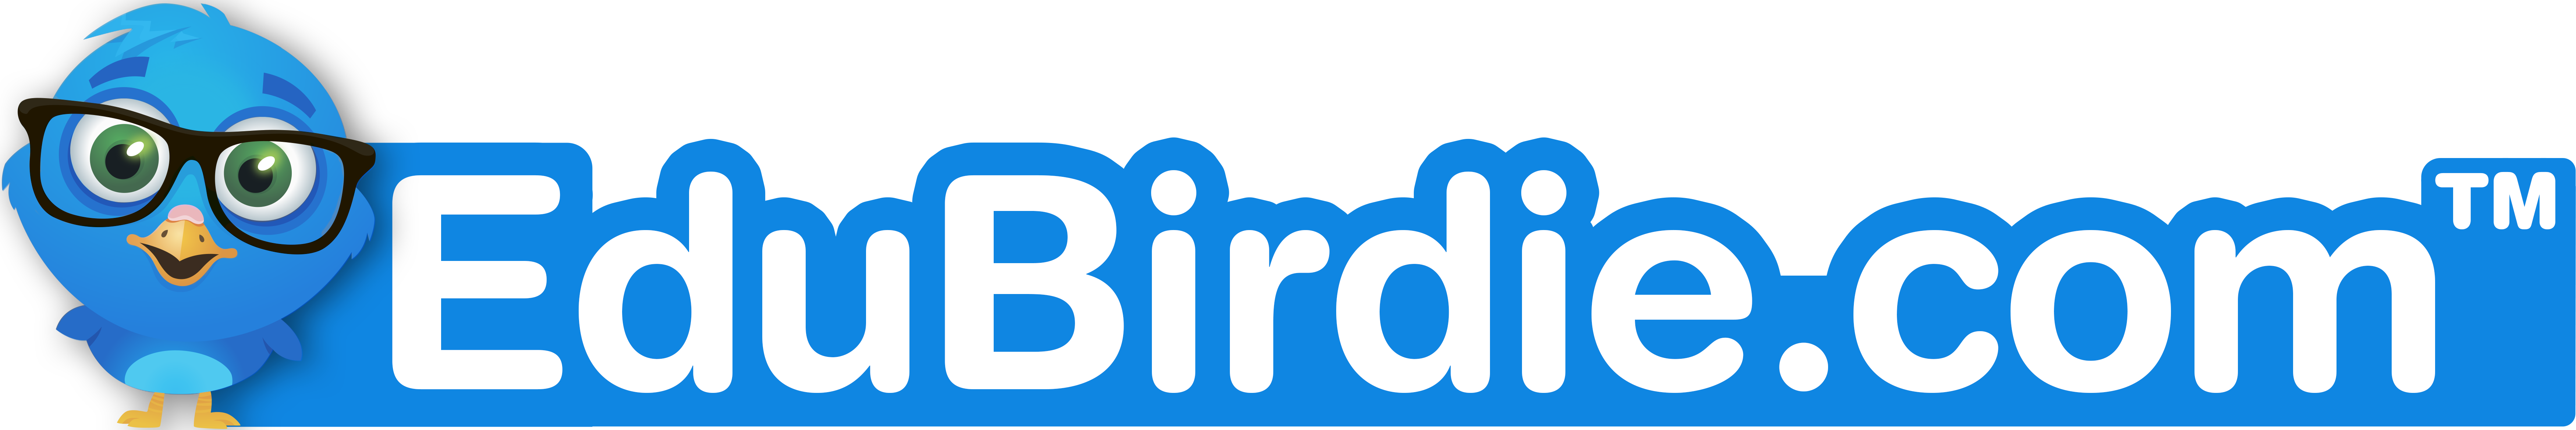 EduBirdie - The professional essay writing service for students who can't even